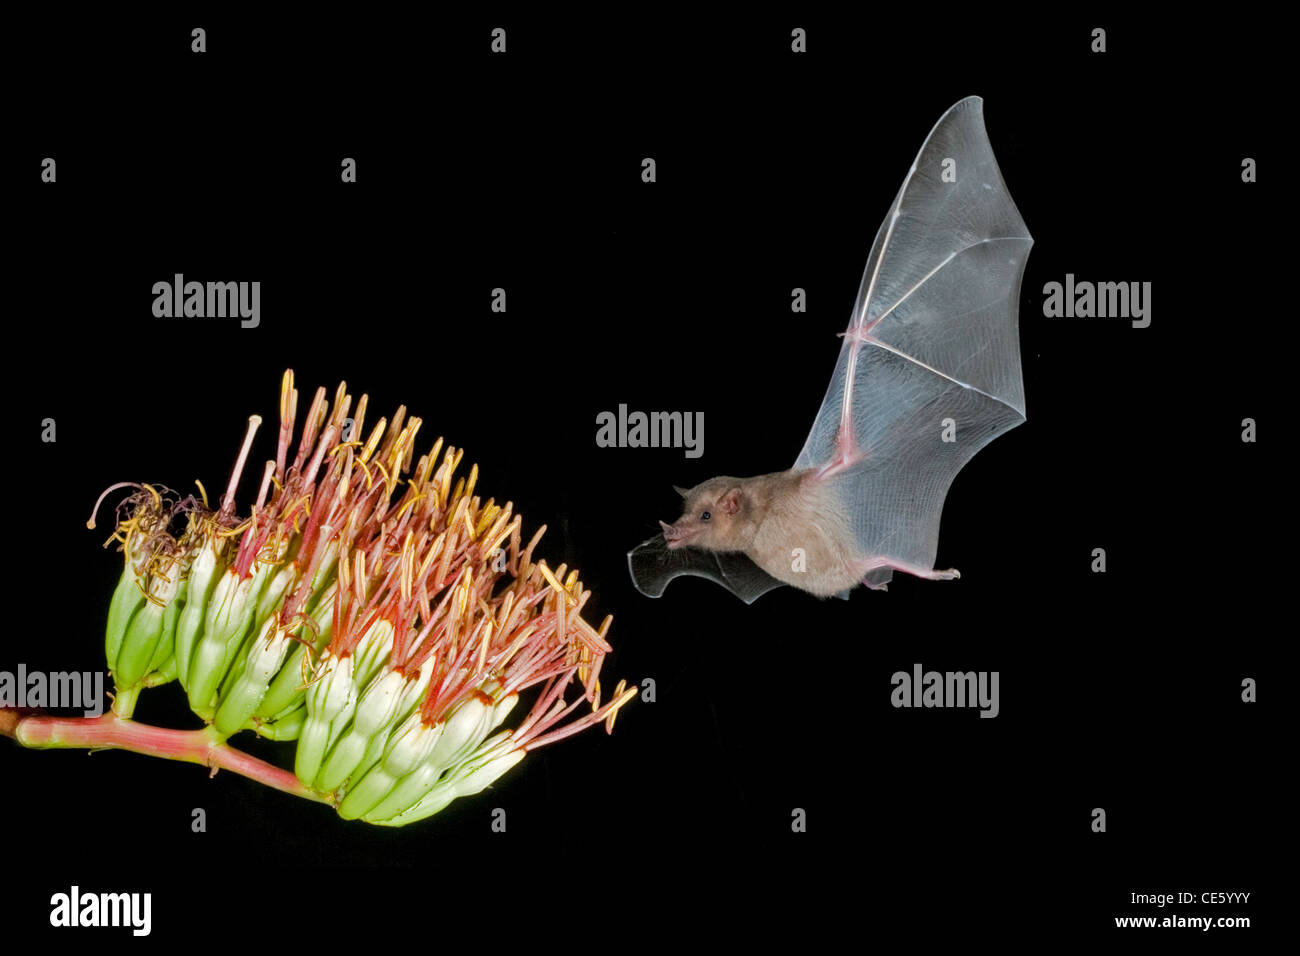 Mexican Long-tongued Bat Choeronycteris mexicana Amado, Arizona, United States 19 August Adult at Parry's Agave flowers Stock Photo